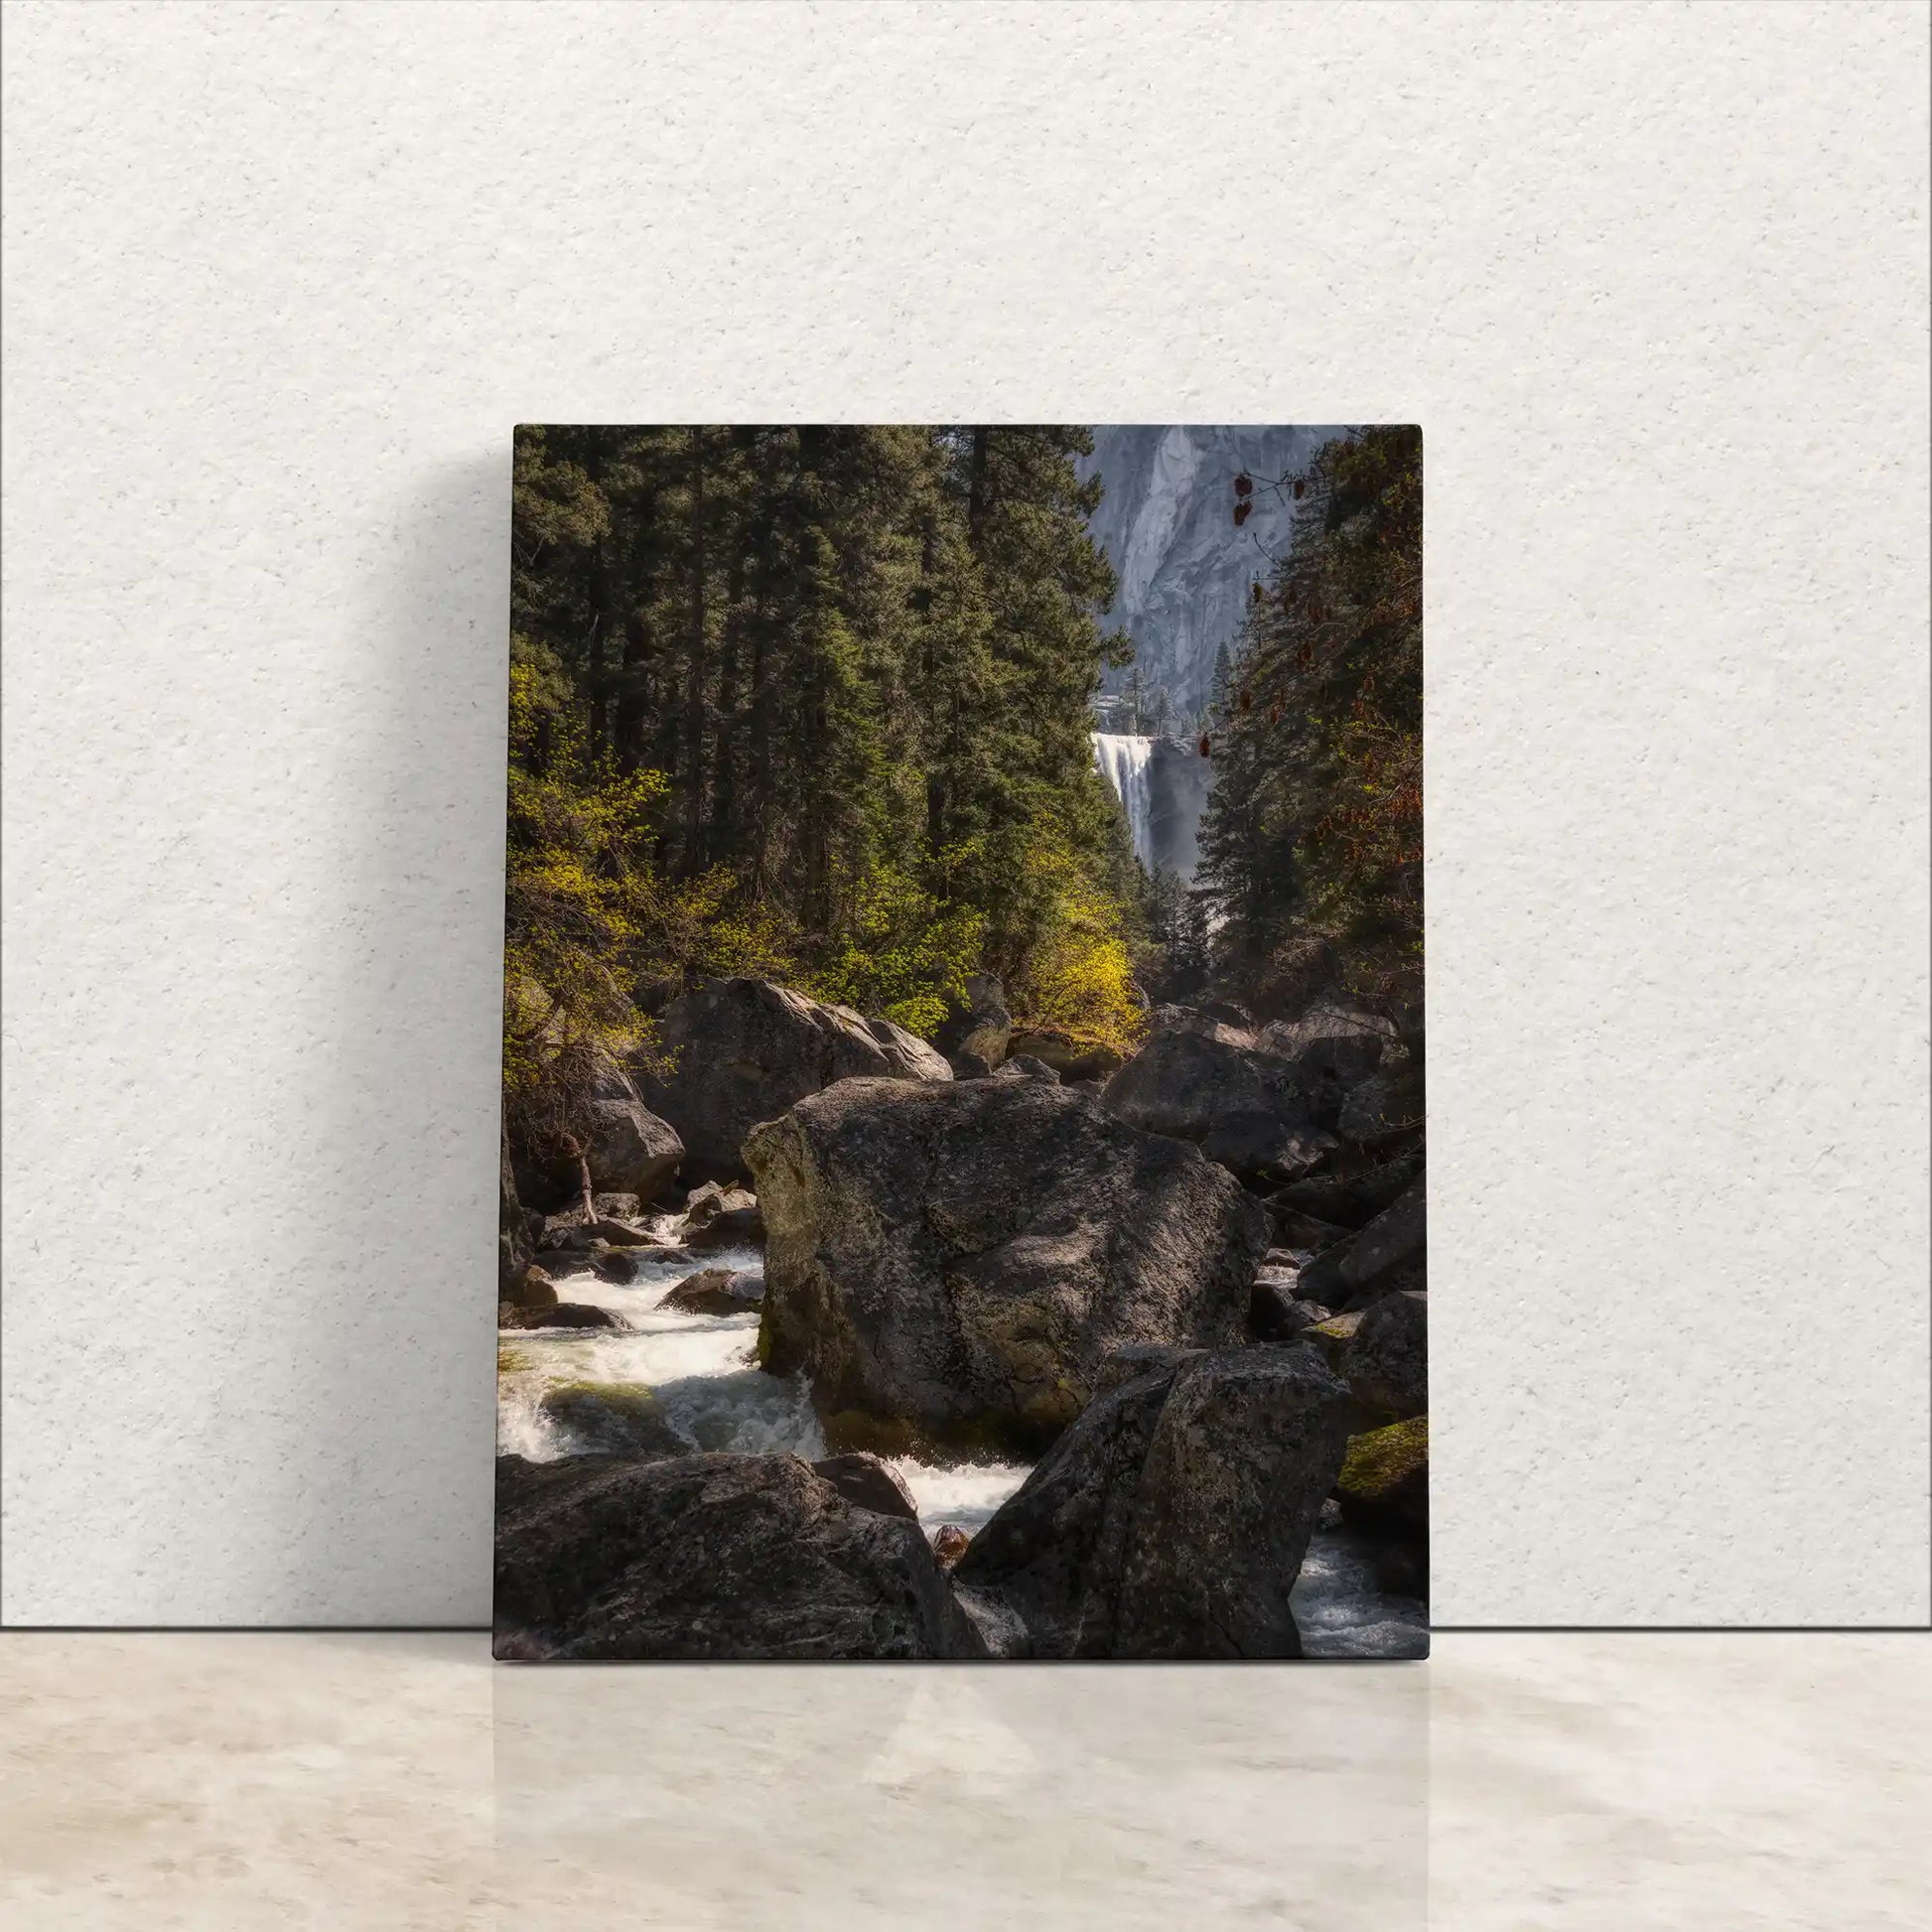 A canvas print leaning against a wall, featuring Vernal Falls and Merced River in Yosemite with lush greenery and rocks.